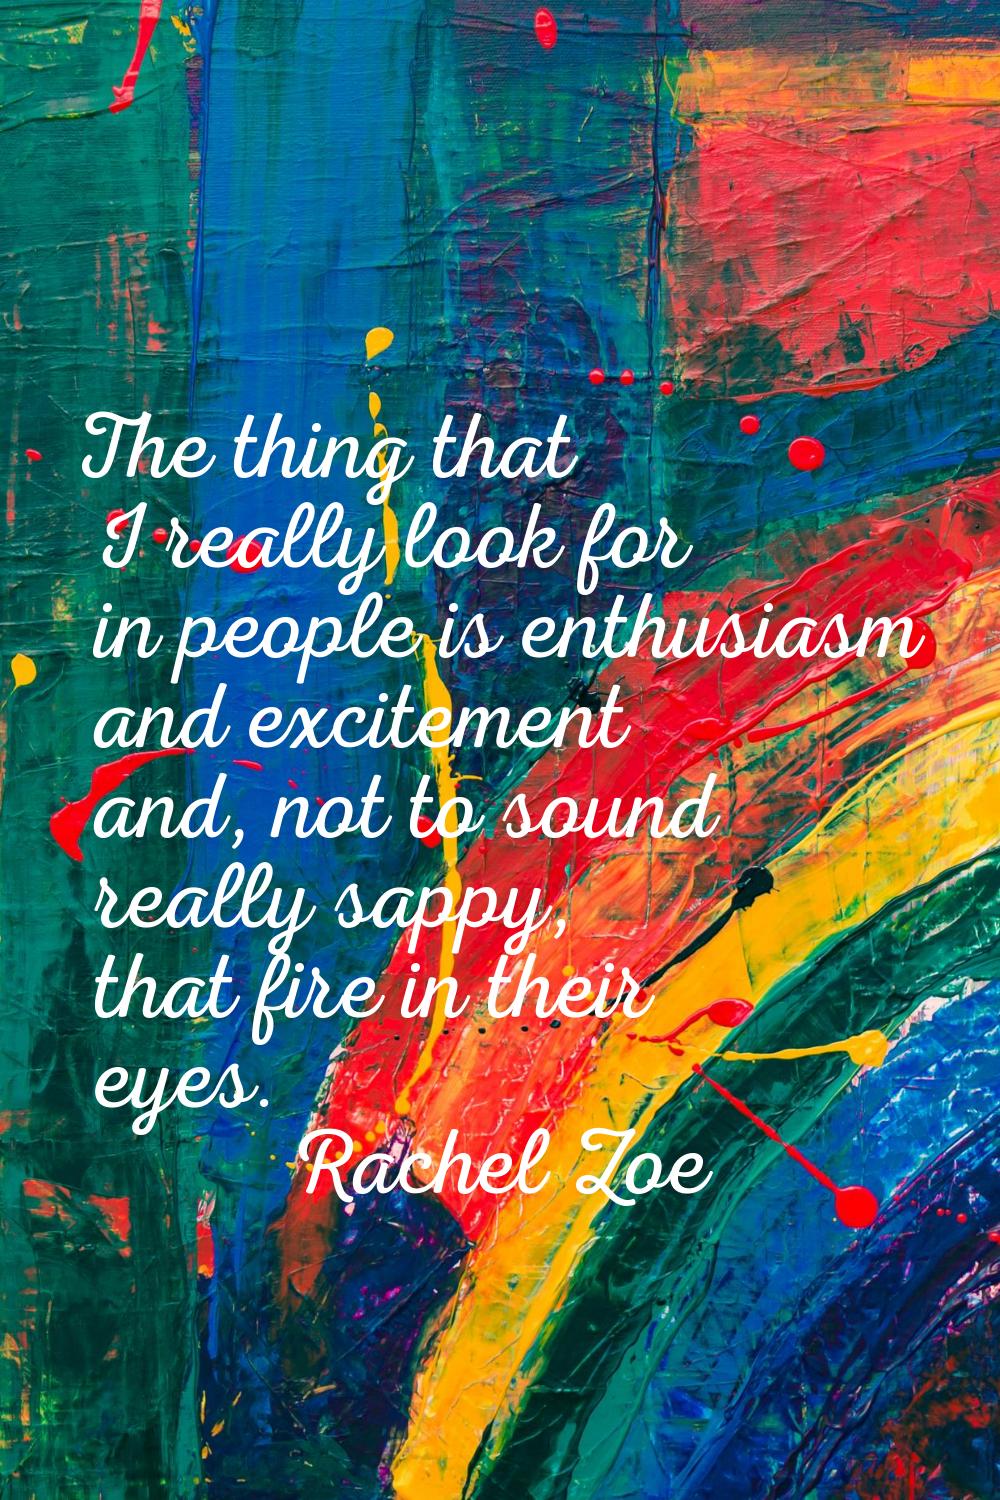 The thing that I really look for in people is enthusiasm and excitement and, not to sound really sa